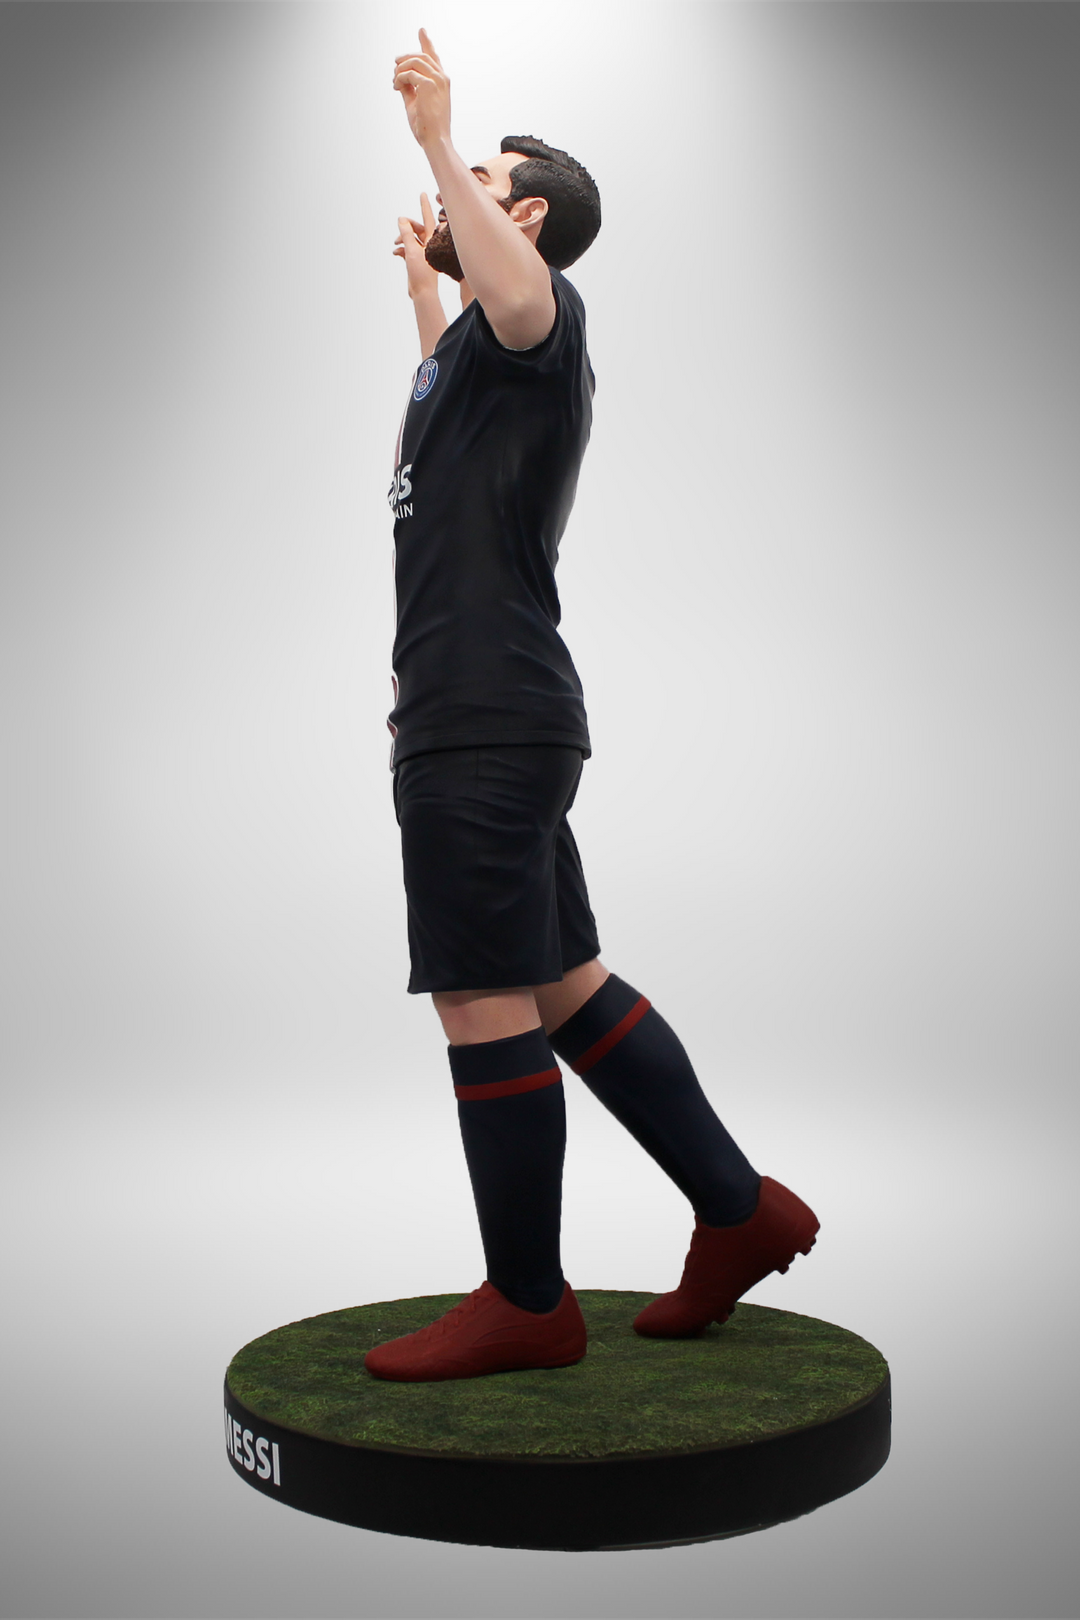 Lionel Messi - Official PSG - Football's Finest 60cm Resin Statue